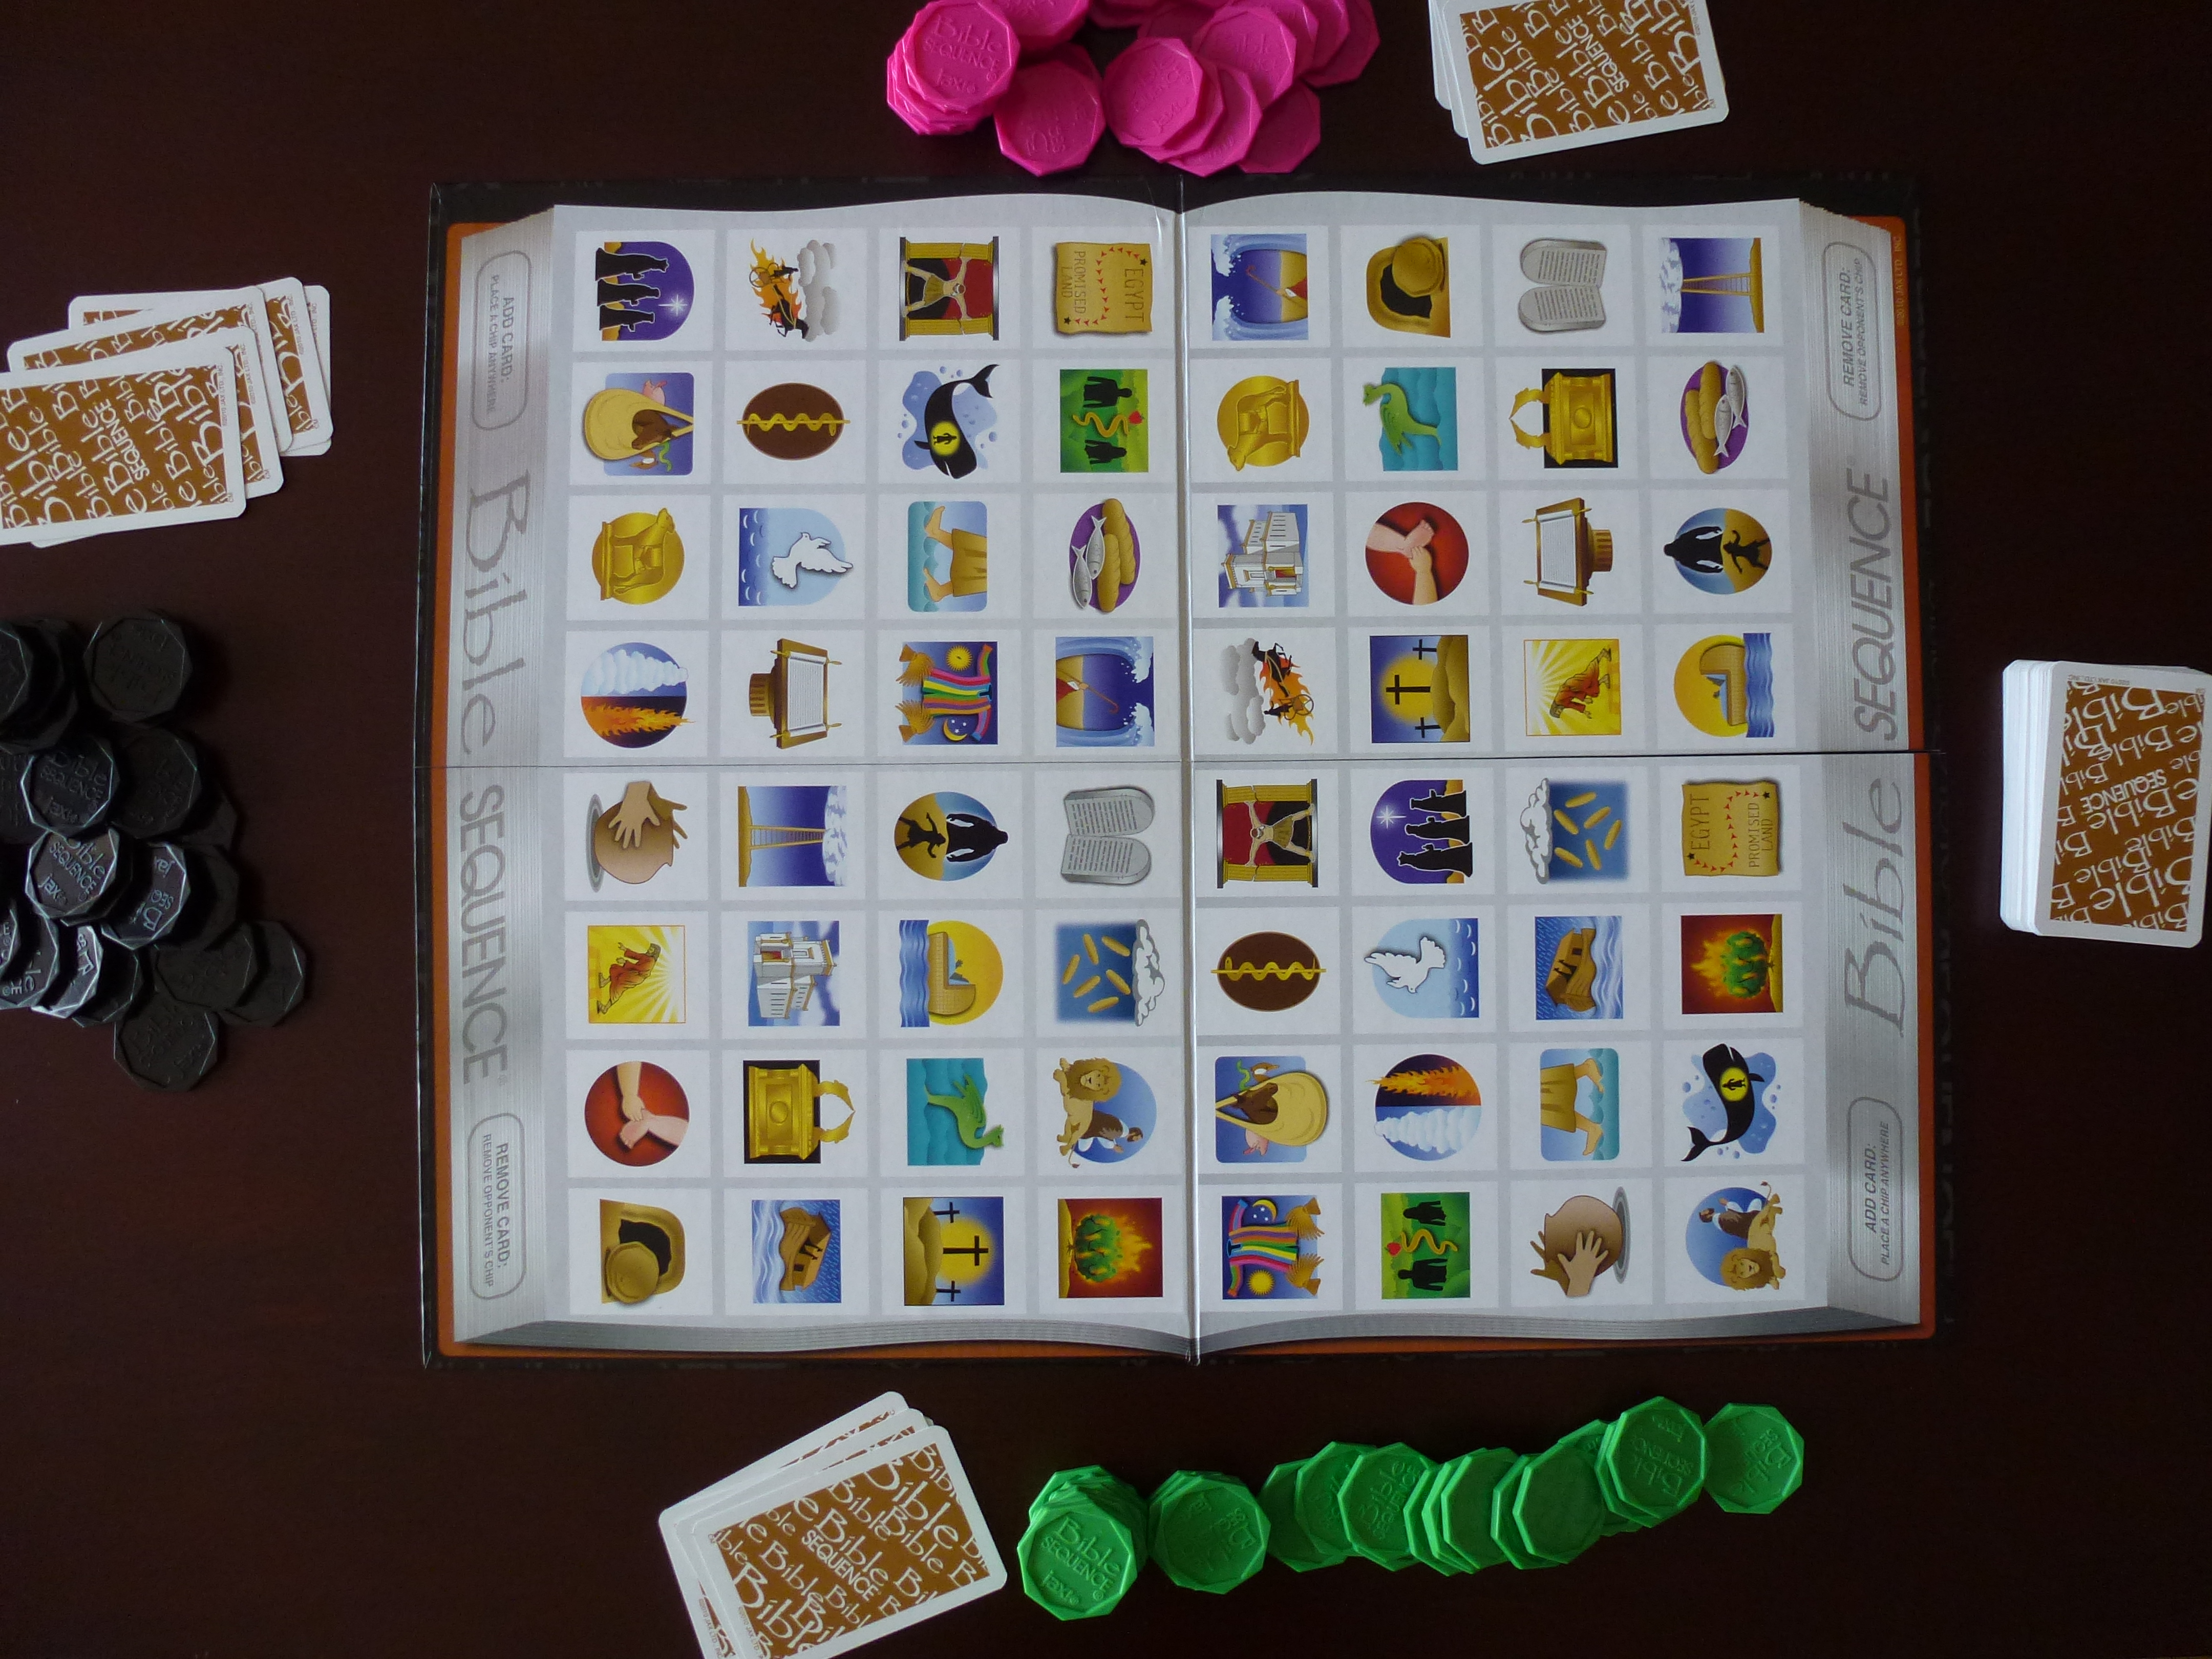 board games sequence instructions